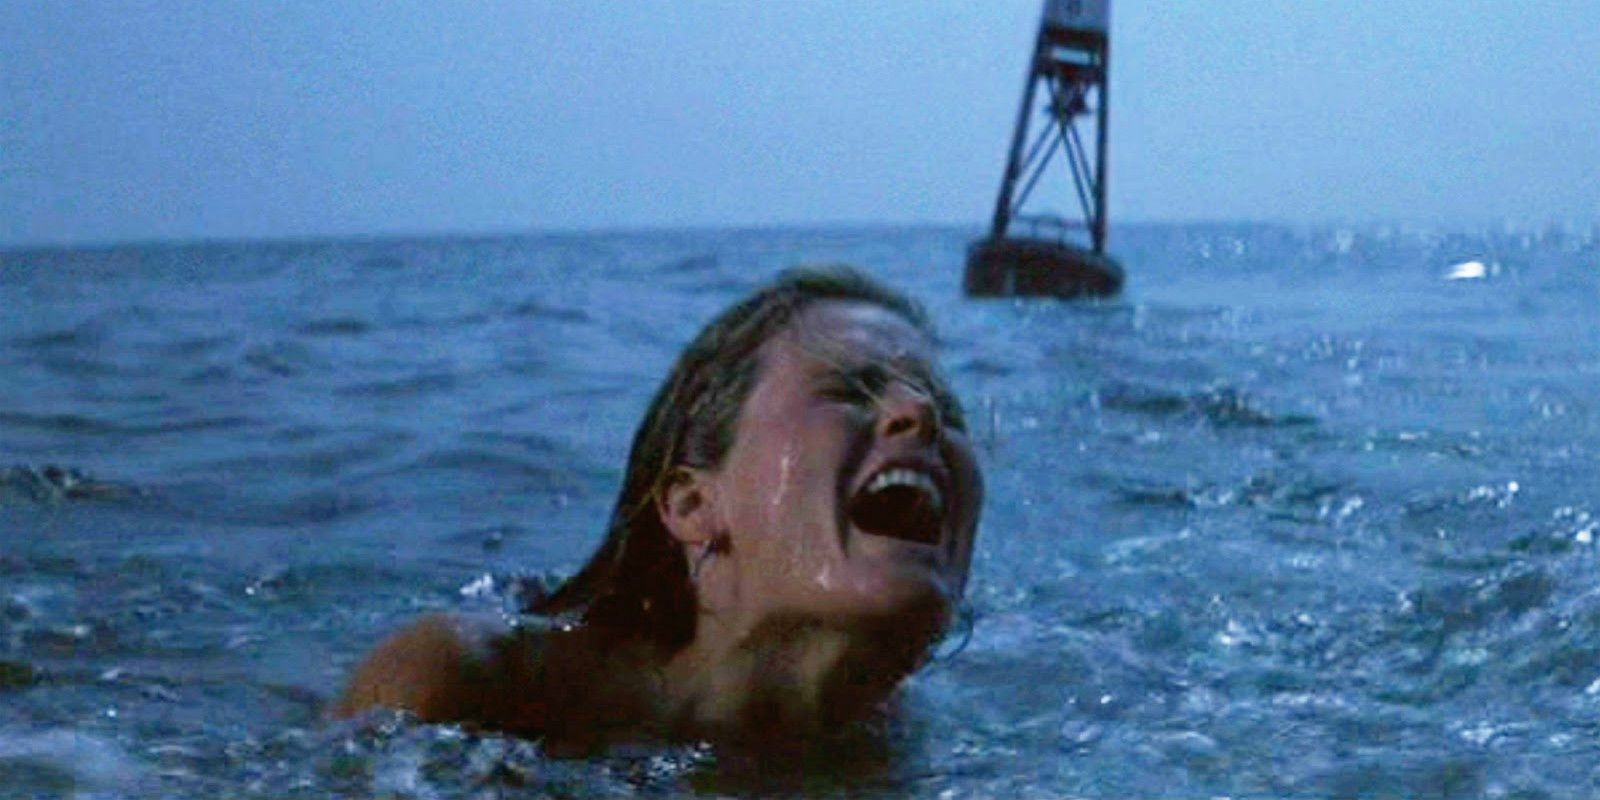 Chrissie screaming in the water in the opening scene of Jaws